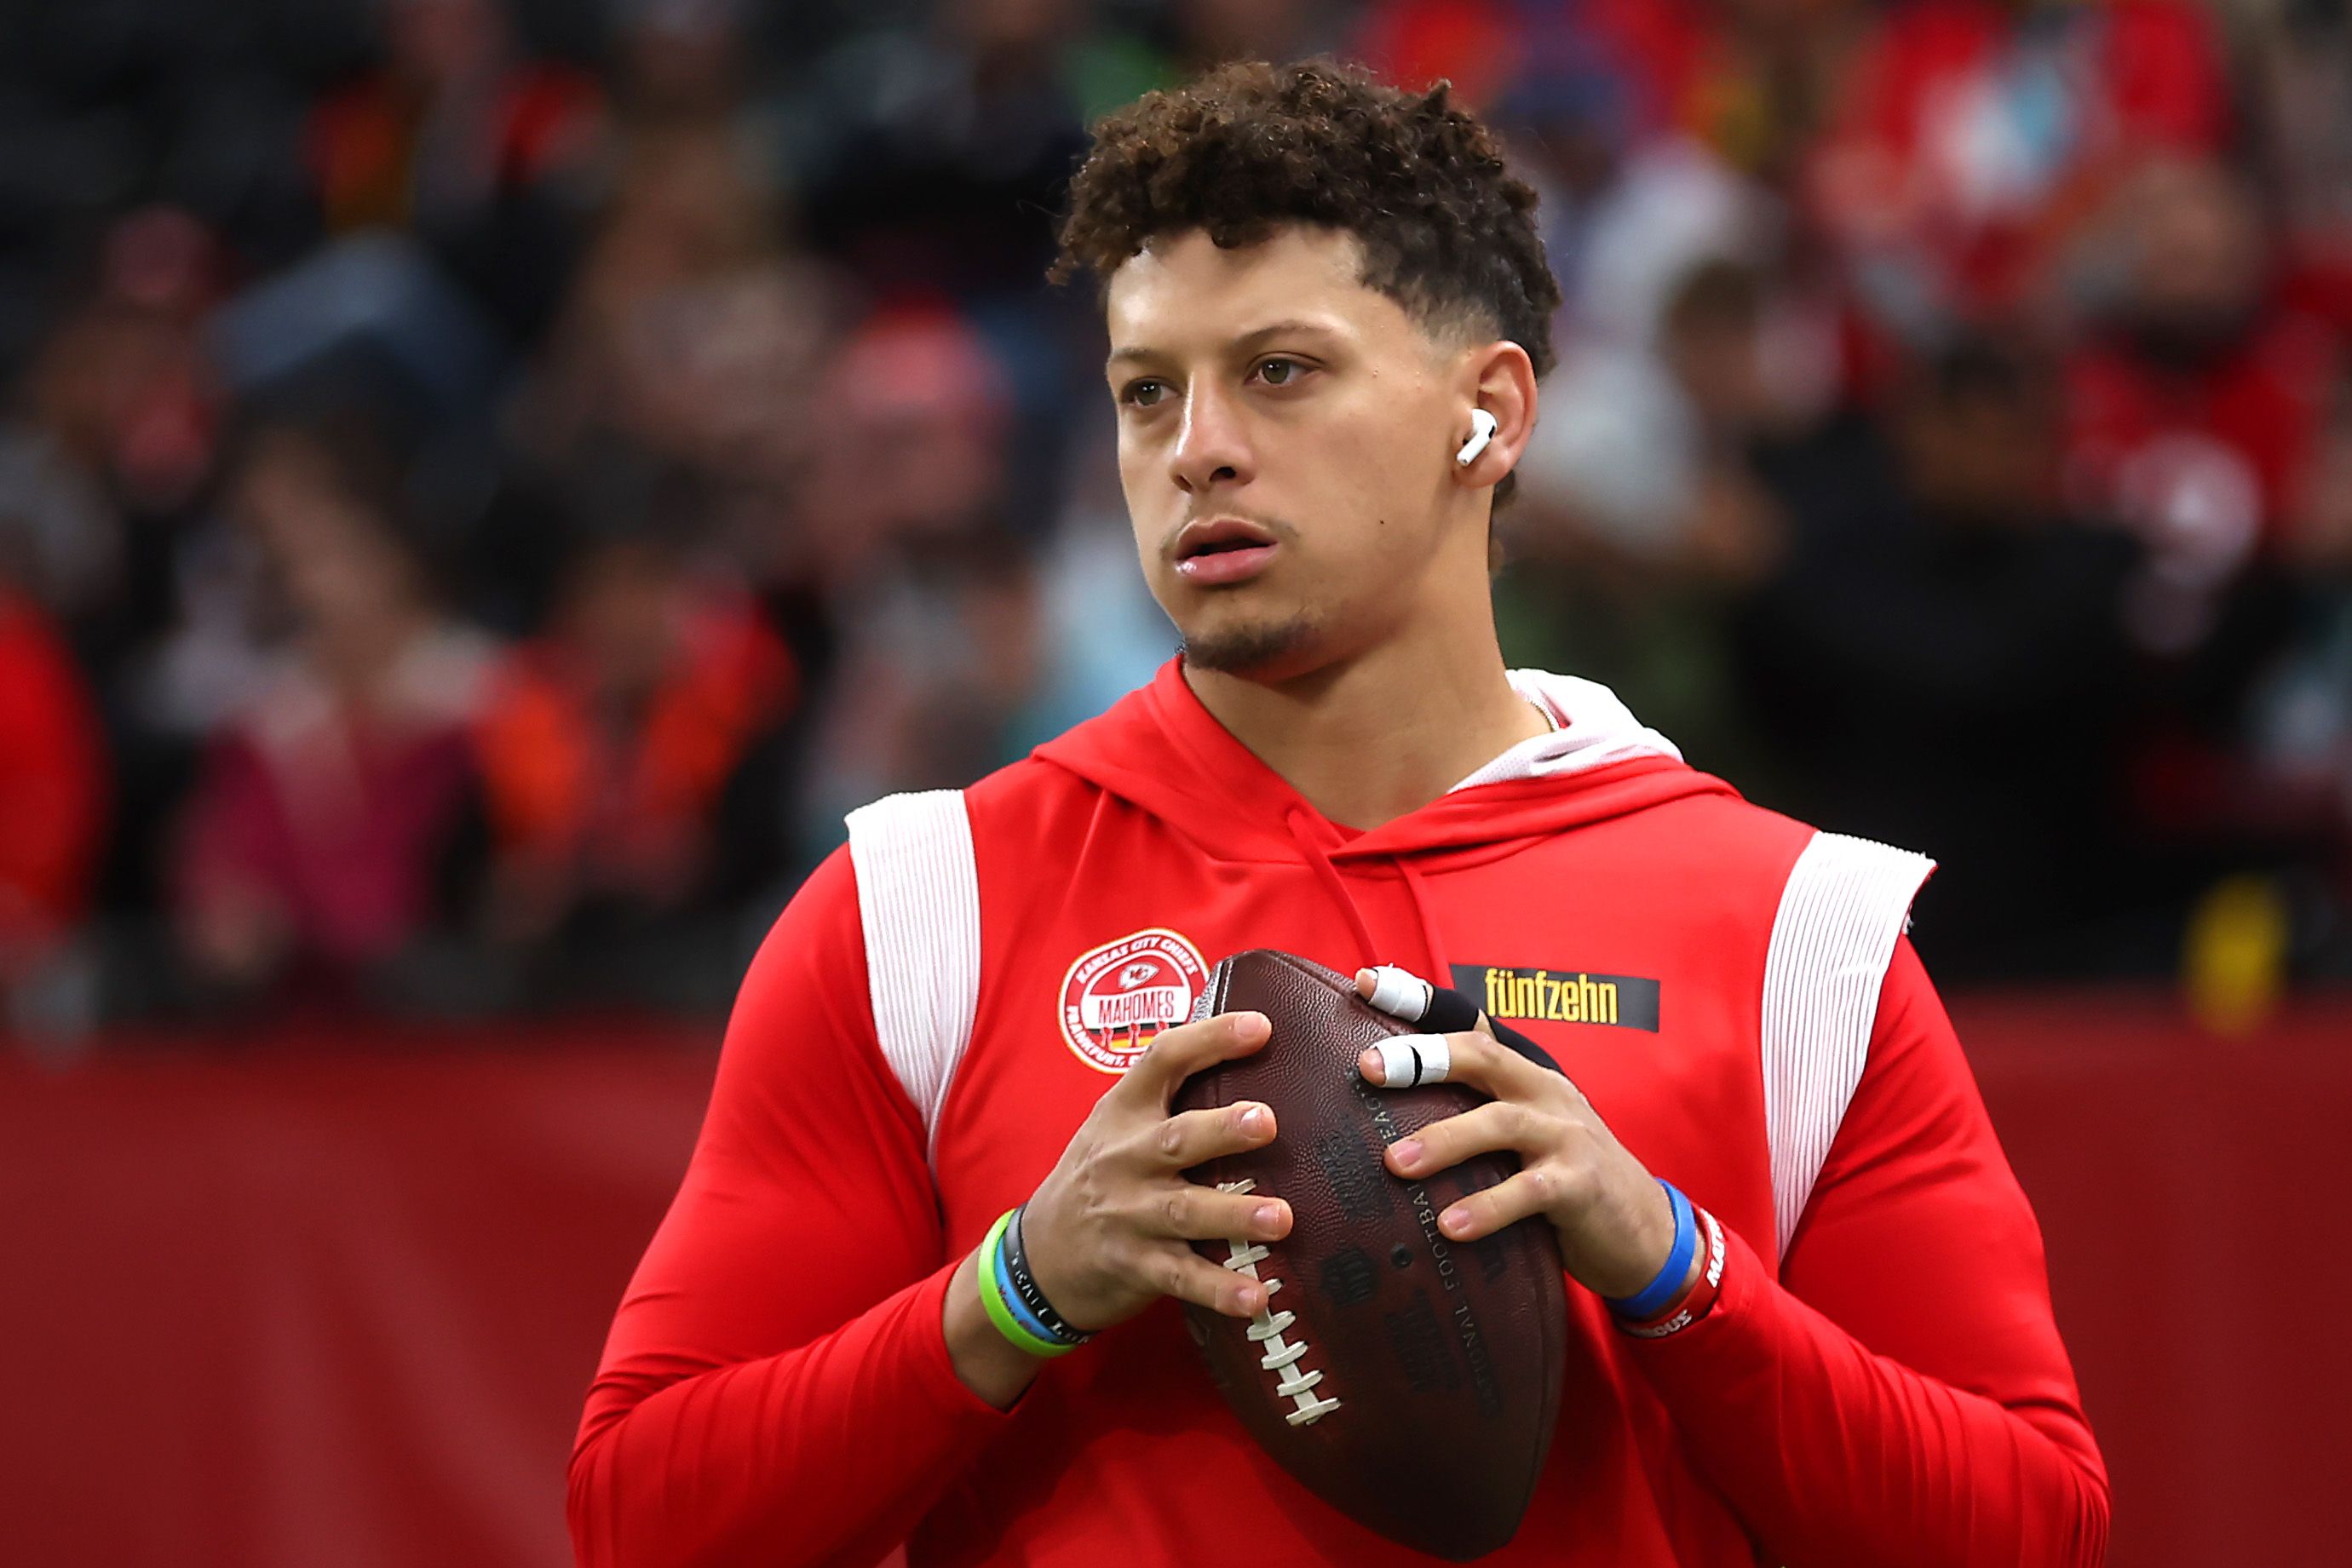 https://hips.hearstapps.com/hmg-prod/images/patrick-mahomes-of-the-kansas-city-chiefs-looks-on-during-news-photo-1699977196.jpg